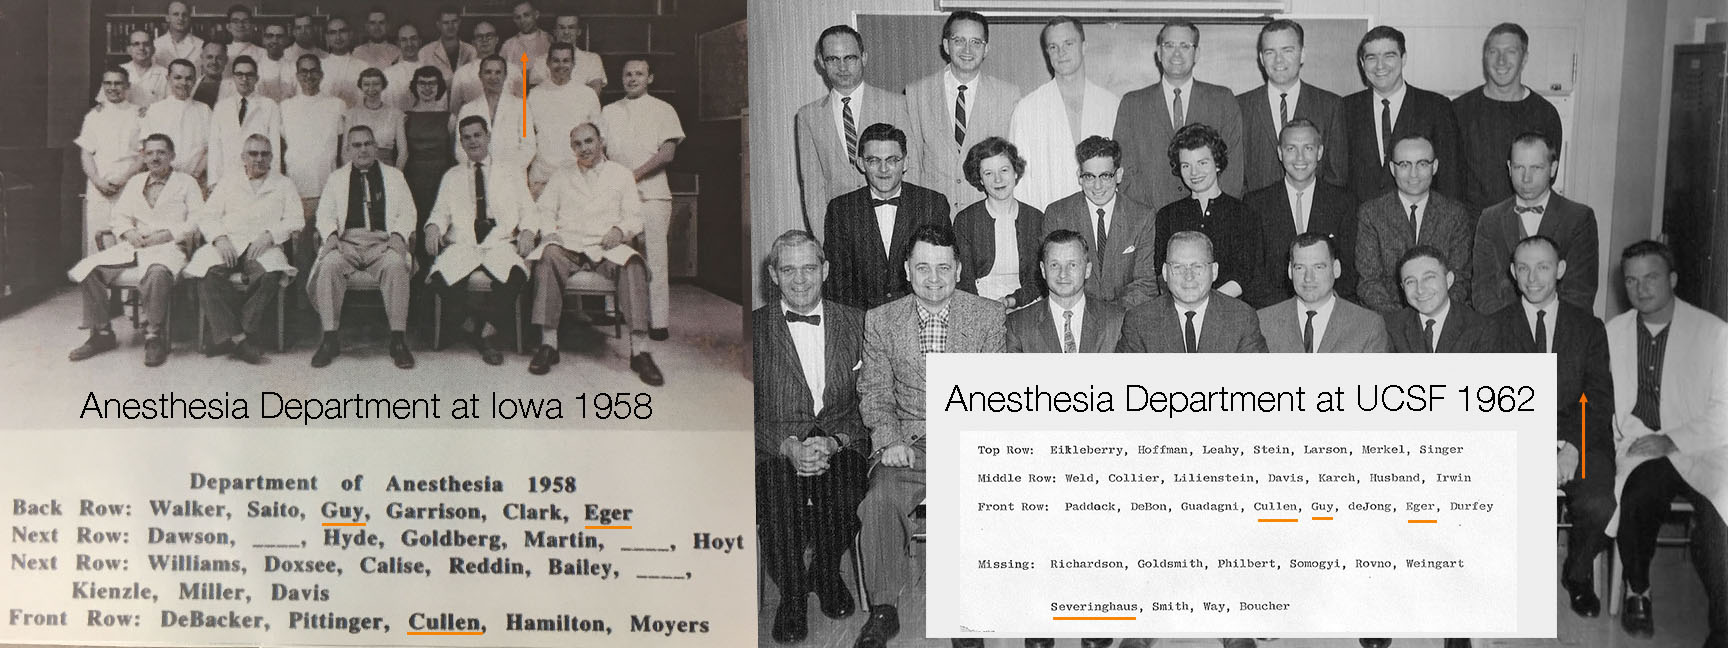 the class of 1958 anesthesia department at Iowa.